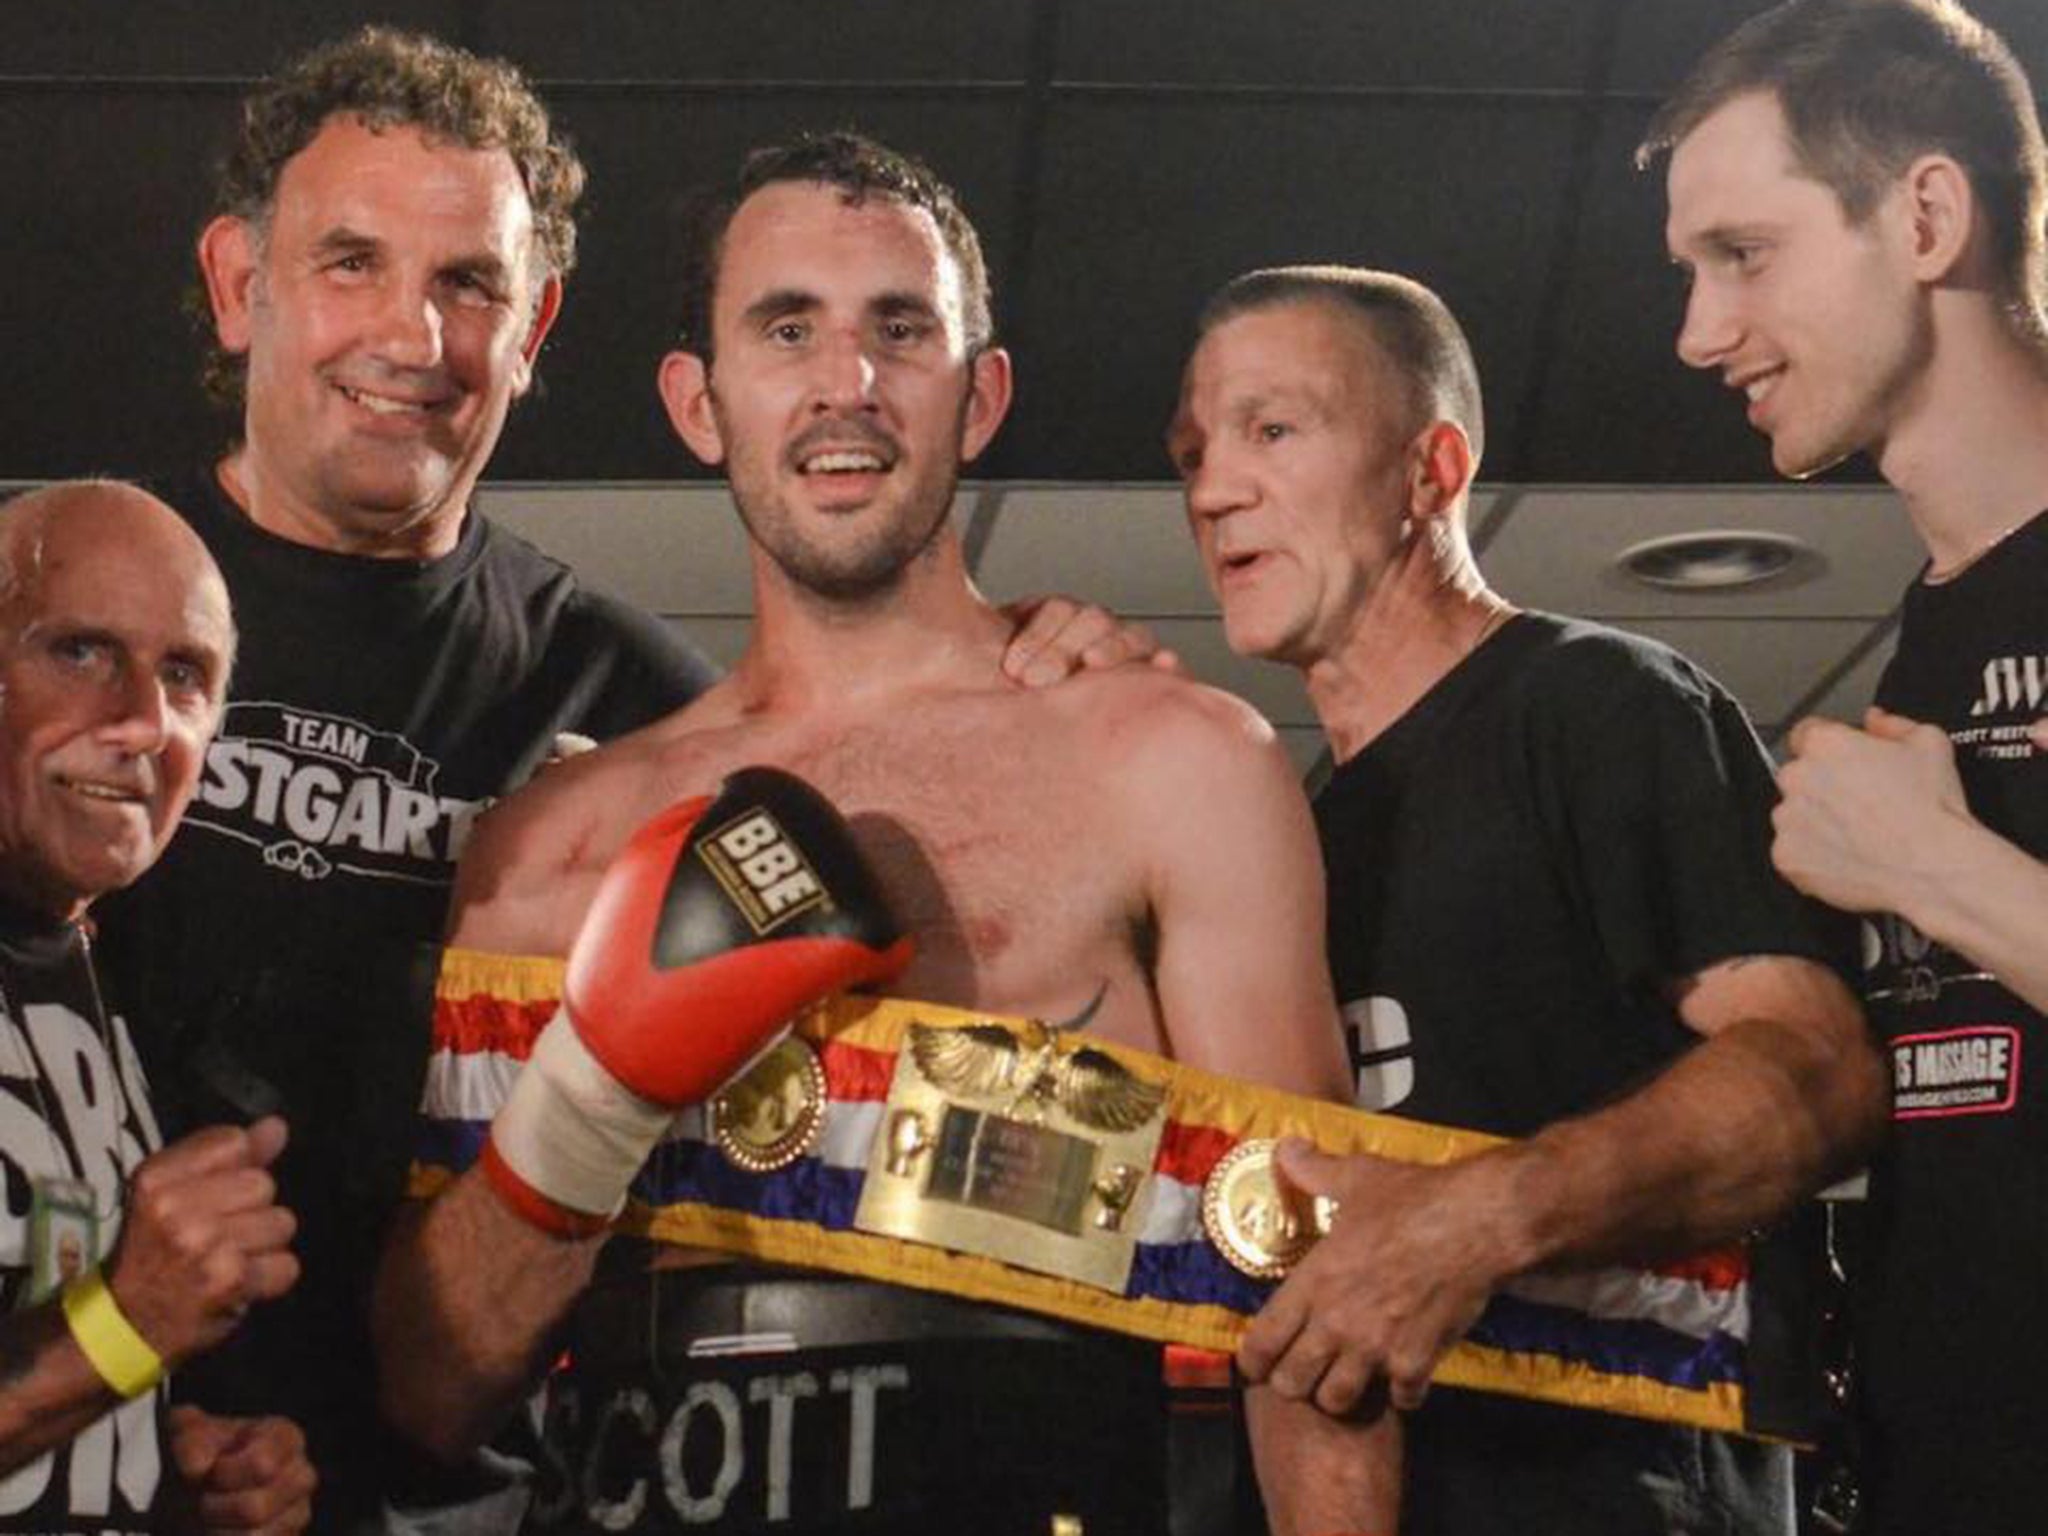 Scott Westgarth suffered fatal head injuries during his victory over Dec Spelman in Doncaster on Saturday